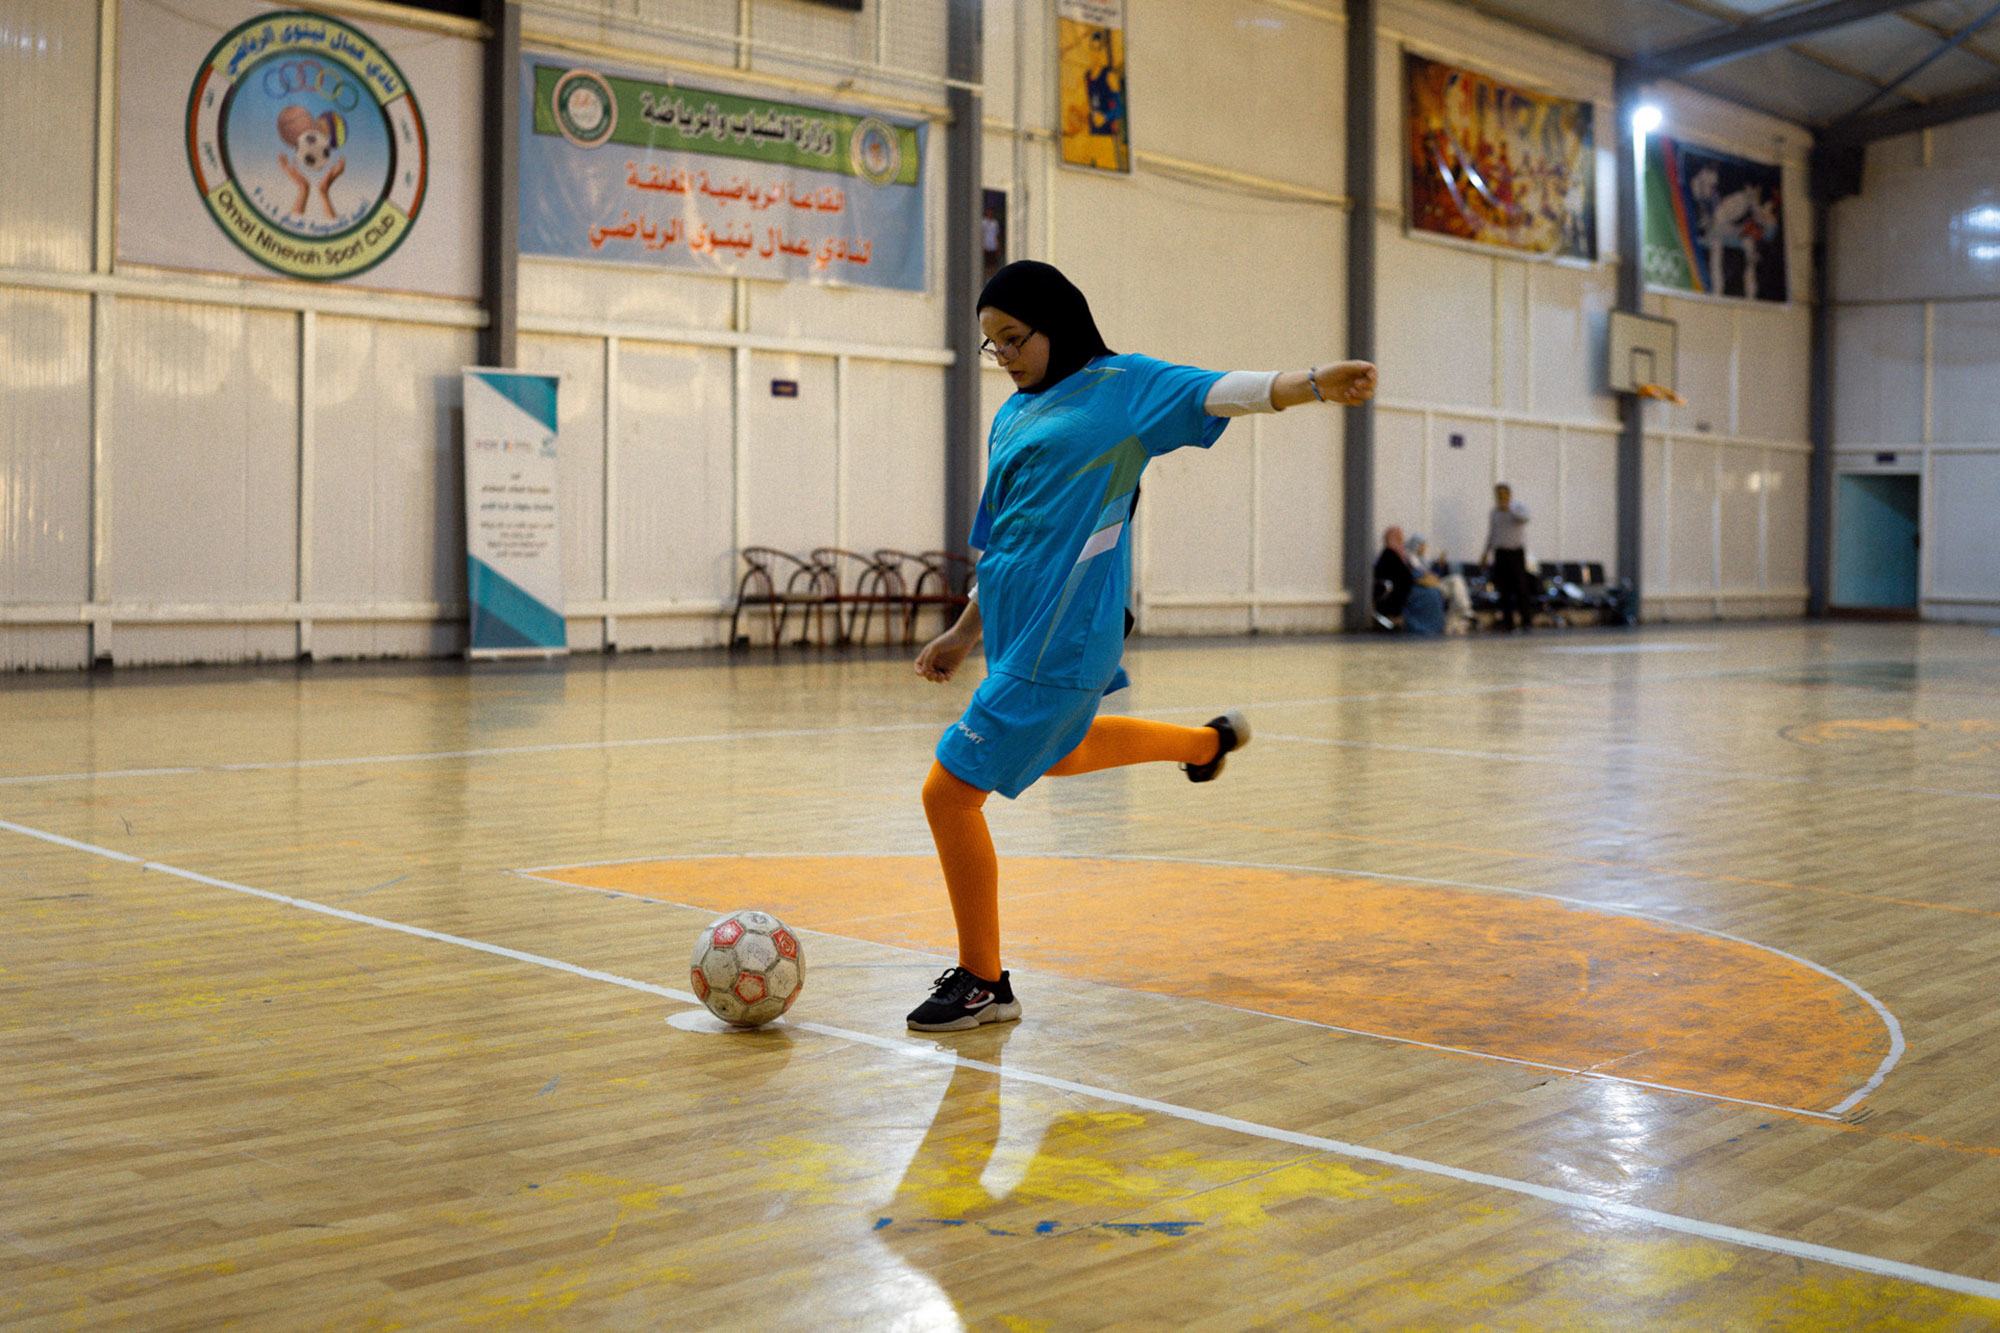 Two days before the matches, Hadeel says she can’t sleep because she's just too excited.